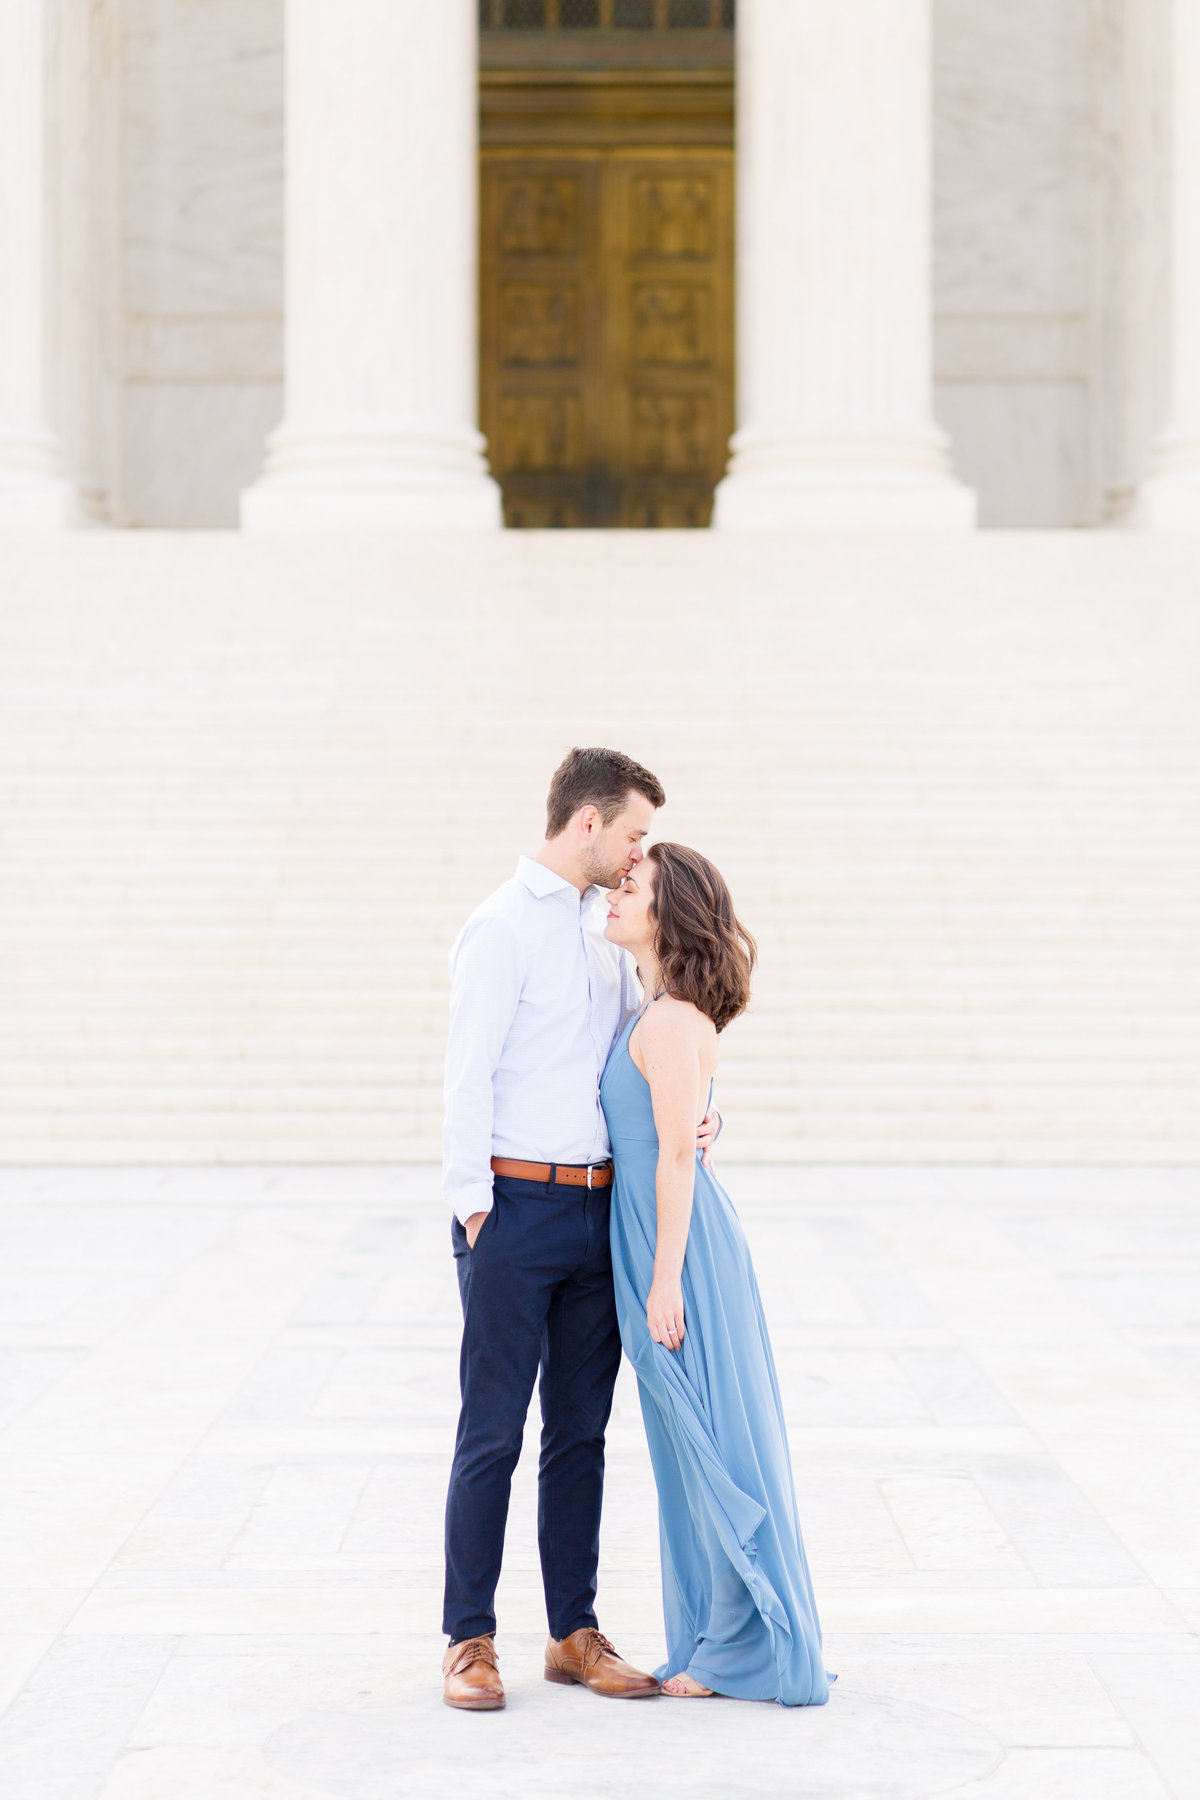 Capitol Building Engagement Session in DC with a visit to Supreme Court Building and Library of Congress | DC Wedding Photographer | Taylor Rose Photography-28